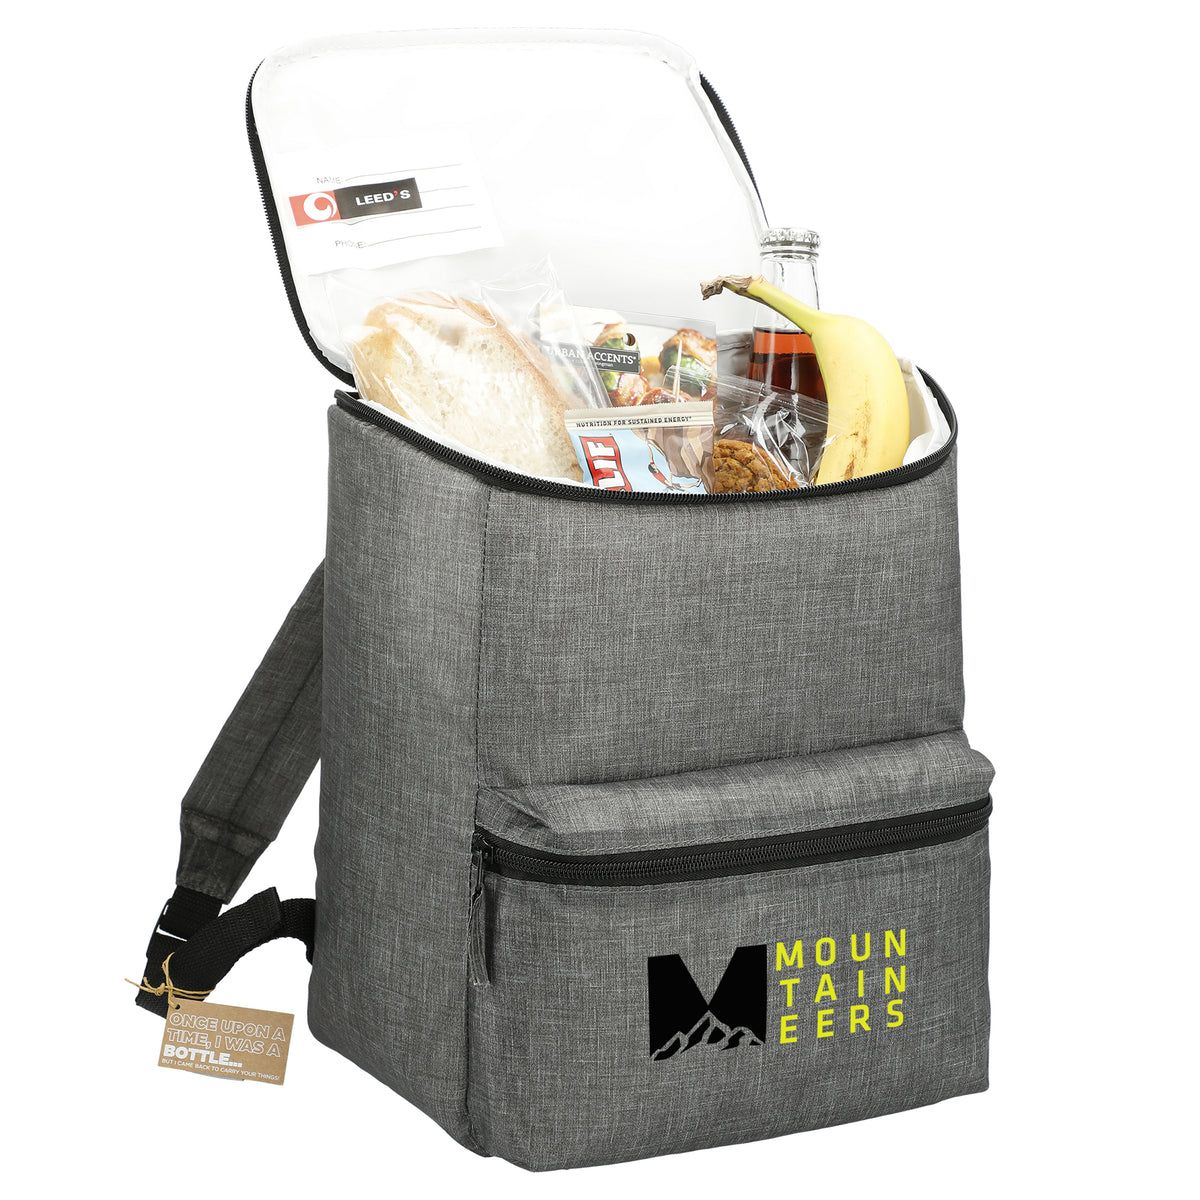 Excursion Recycled Backpack Cooler